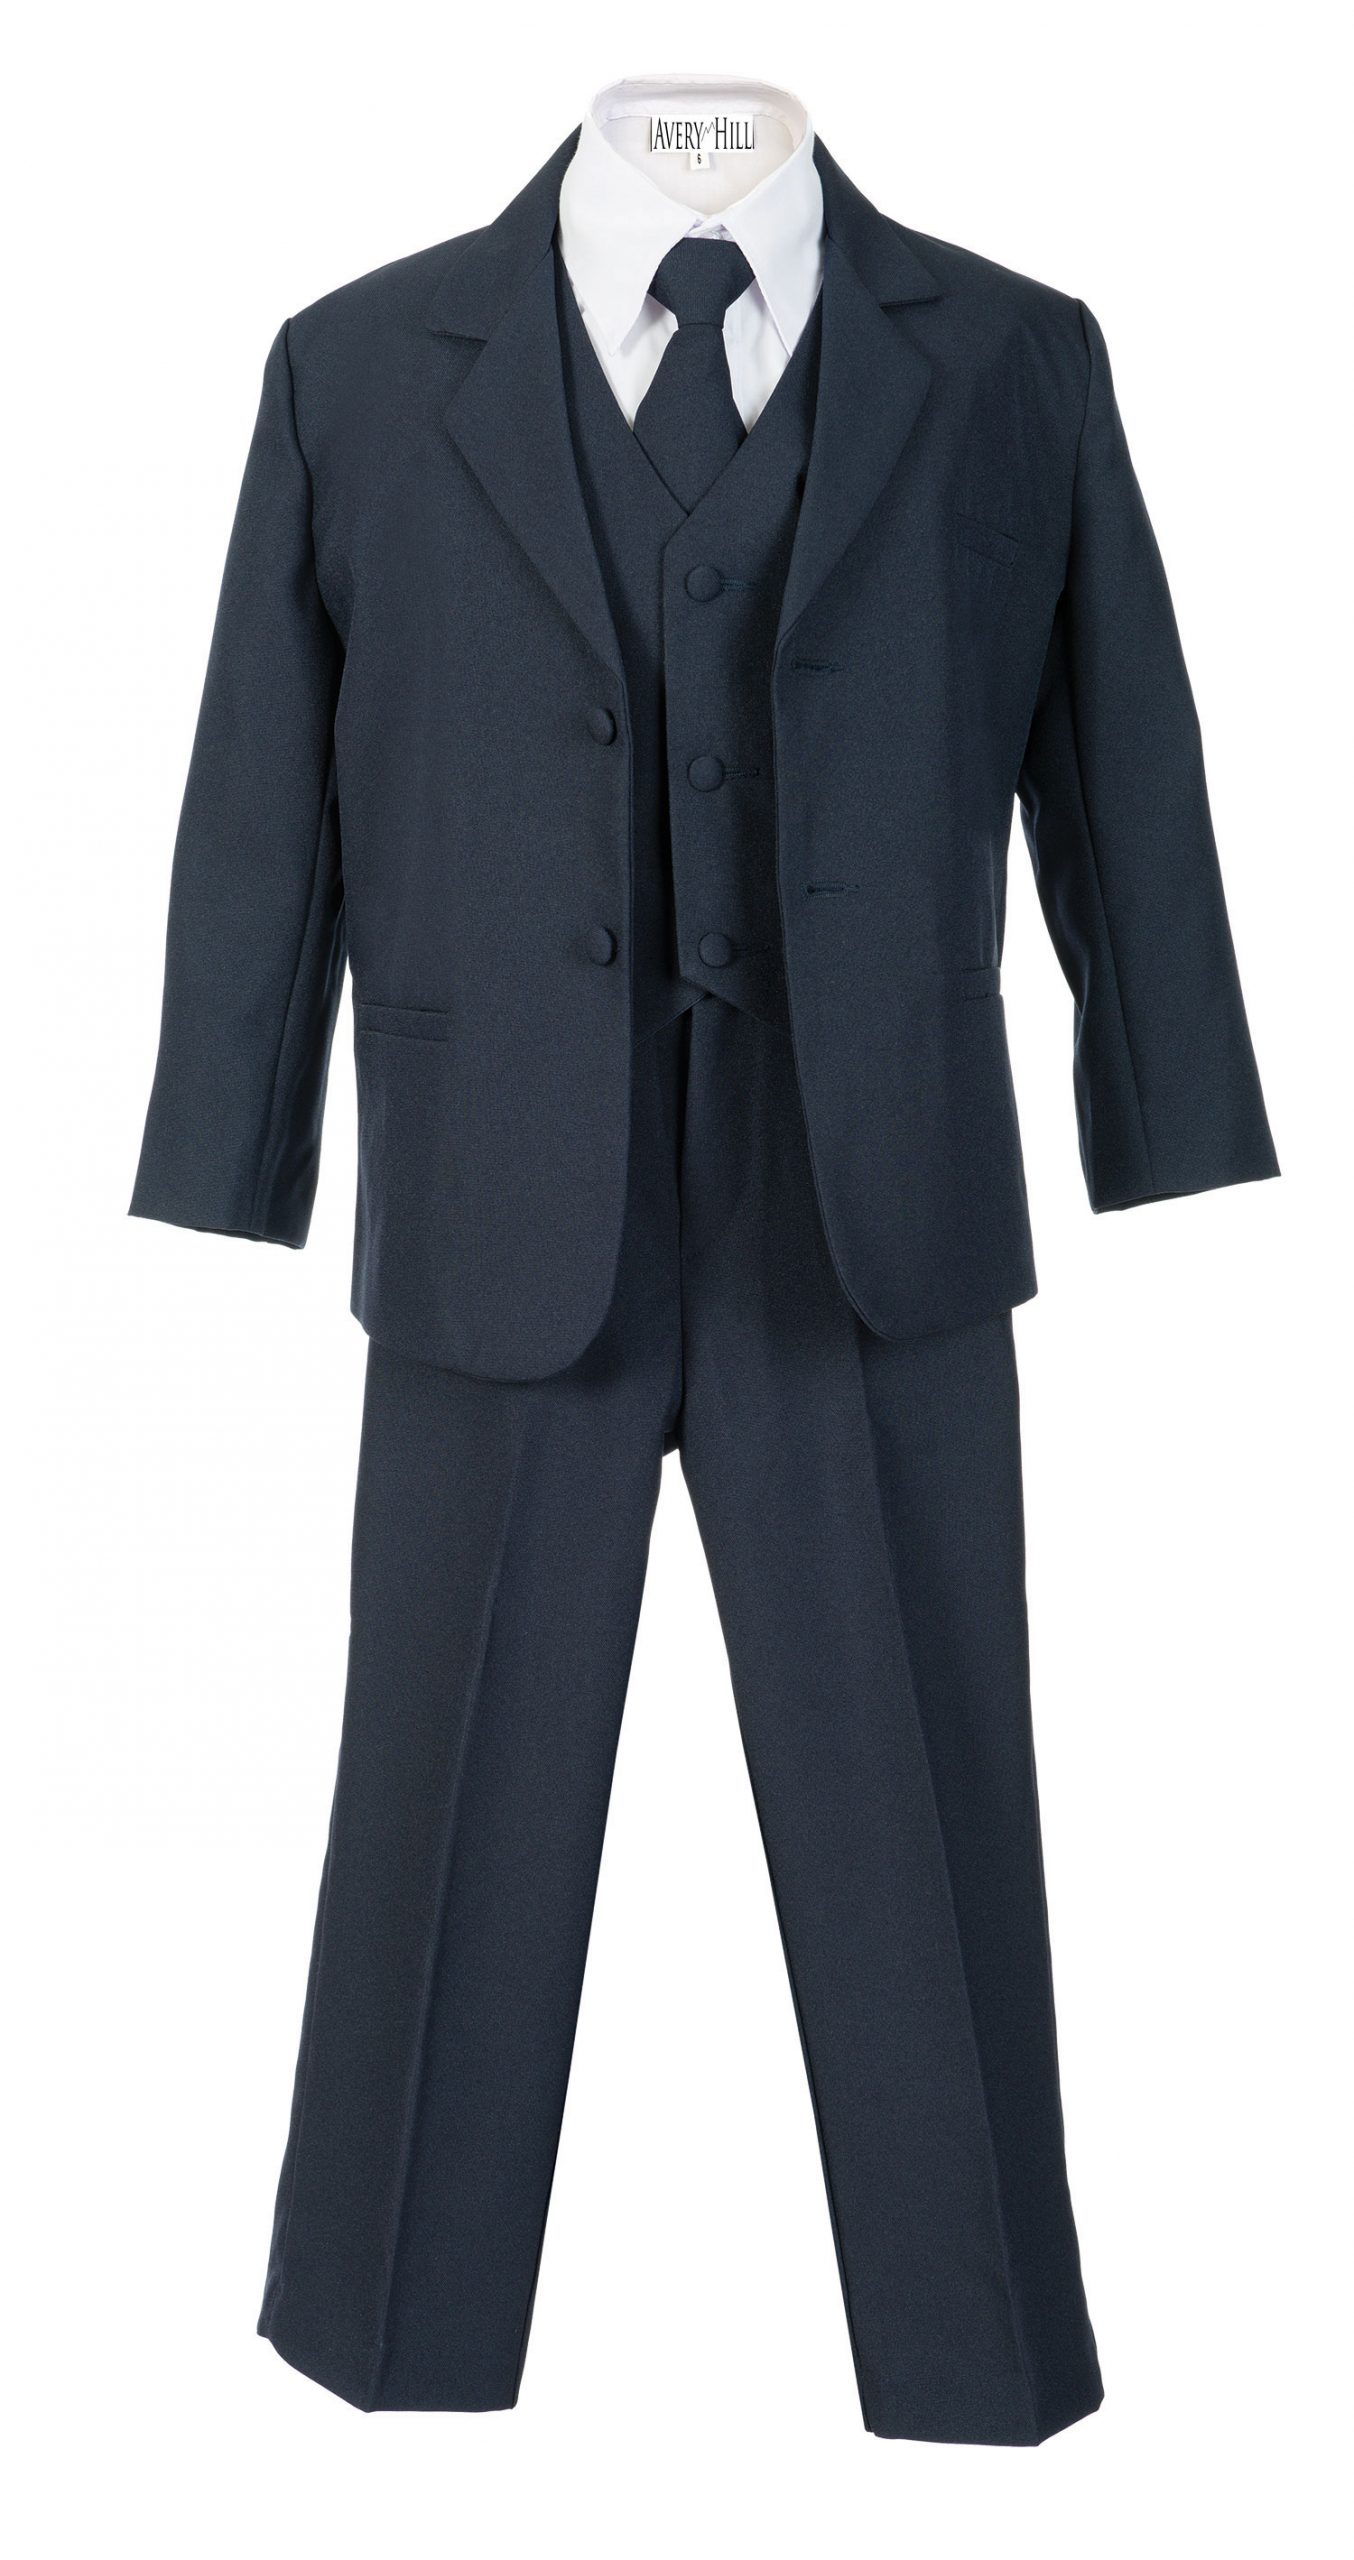 Avery Hill Boys Formal 5 Piece Suit with Shirt and Vest Navy - XL